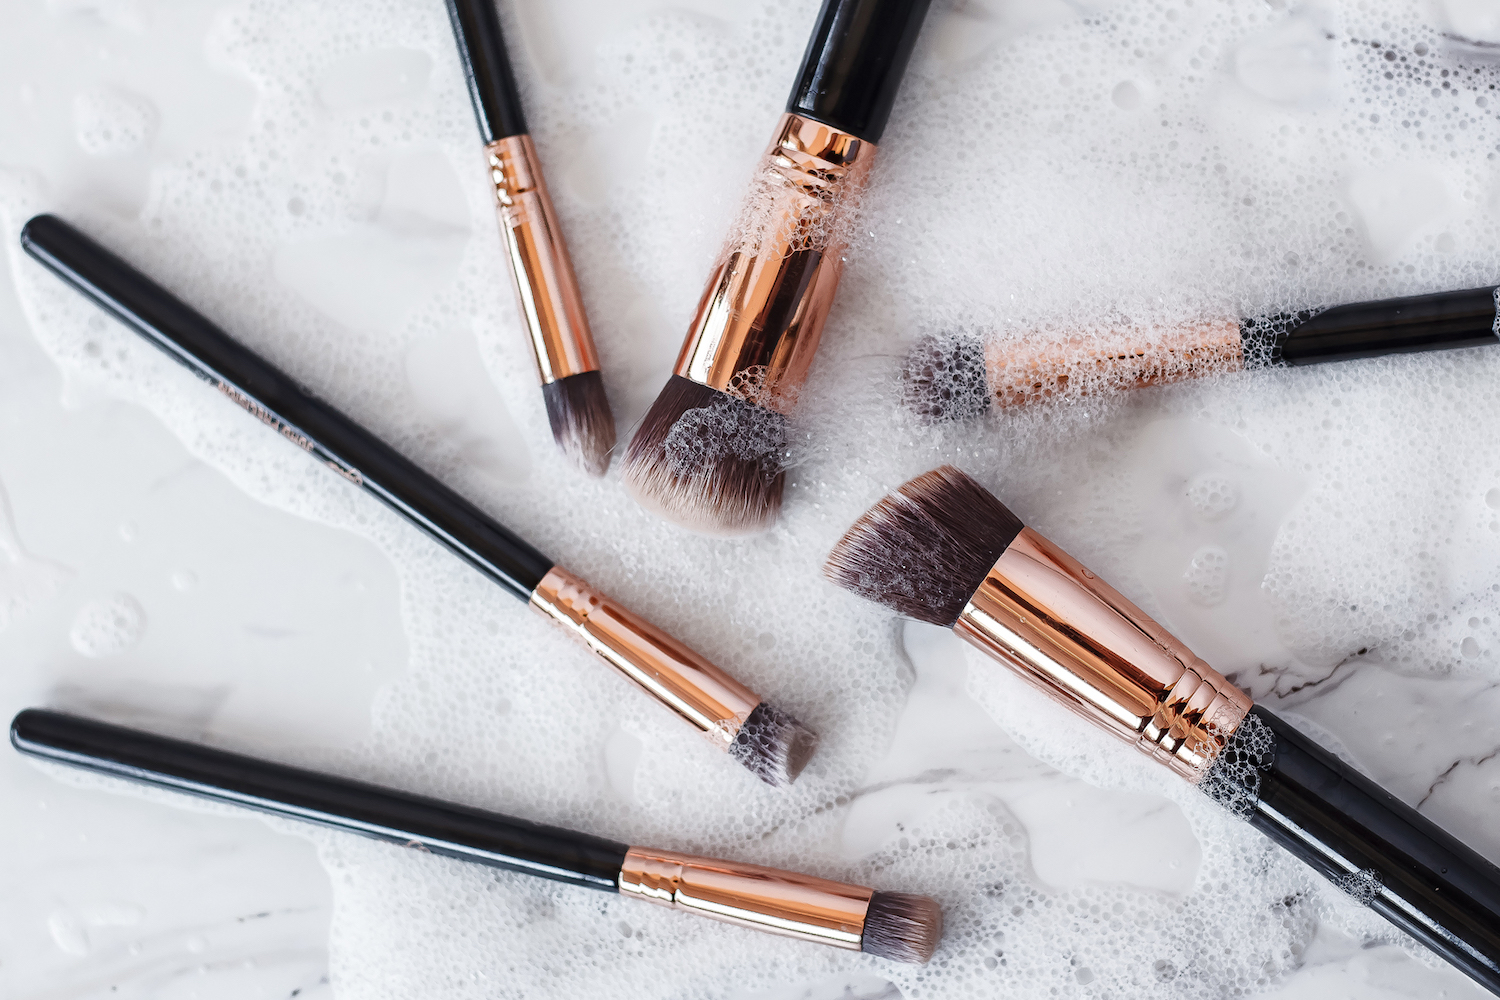 How to Clean your Makeup Brushes Properly - The Chriselle Factor